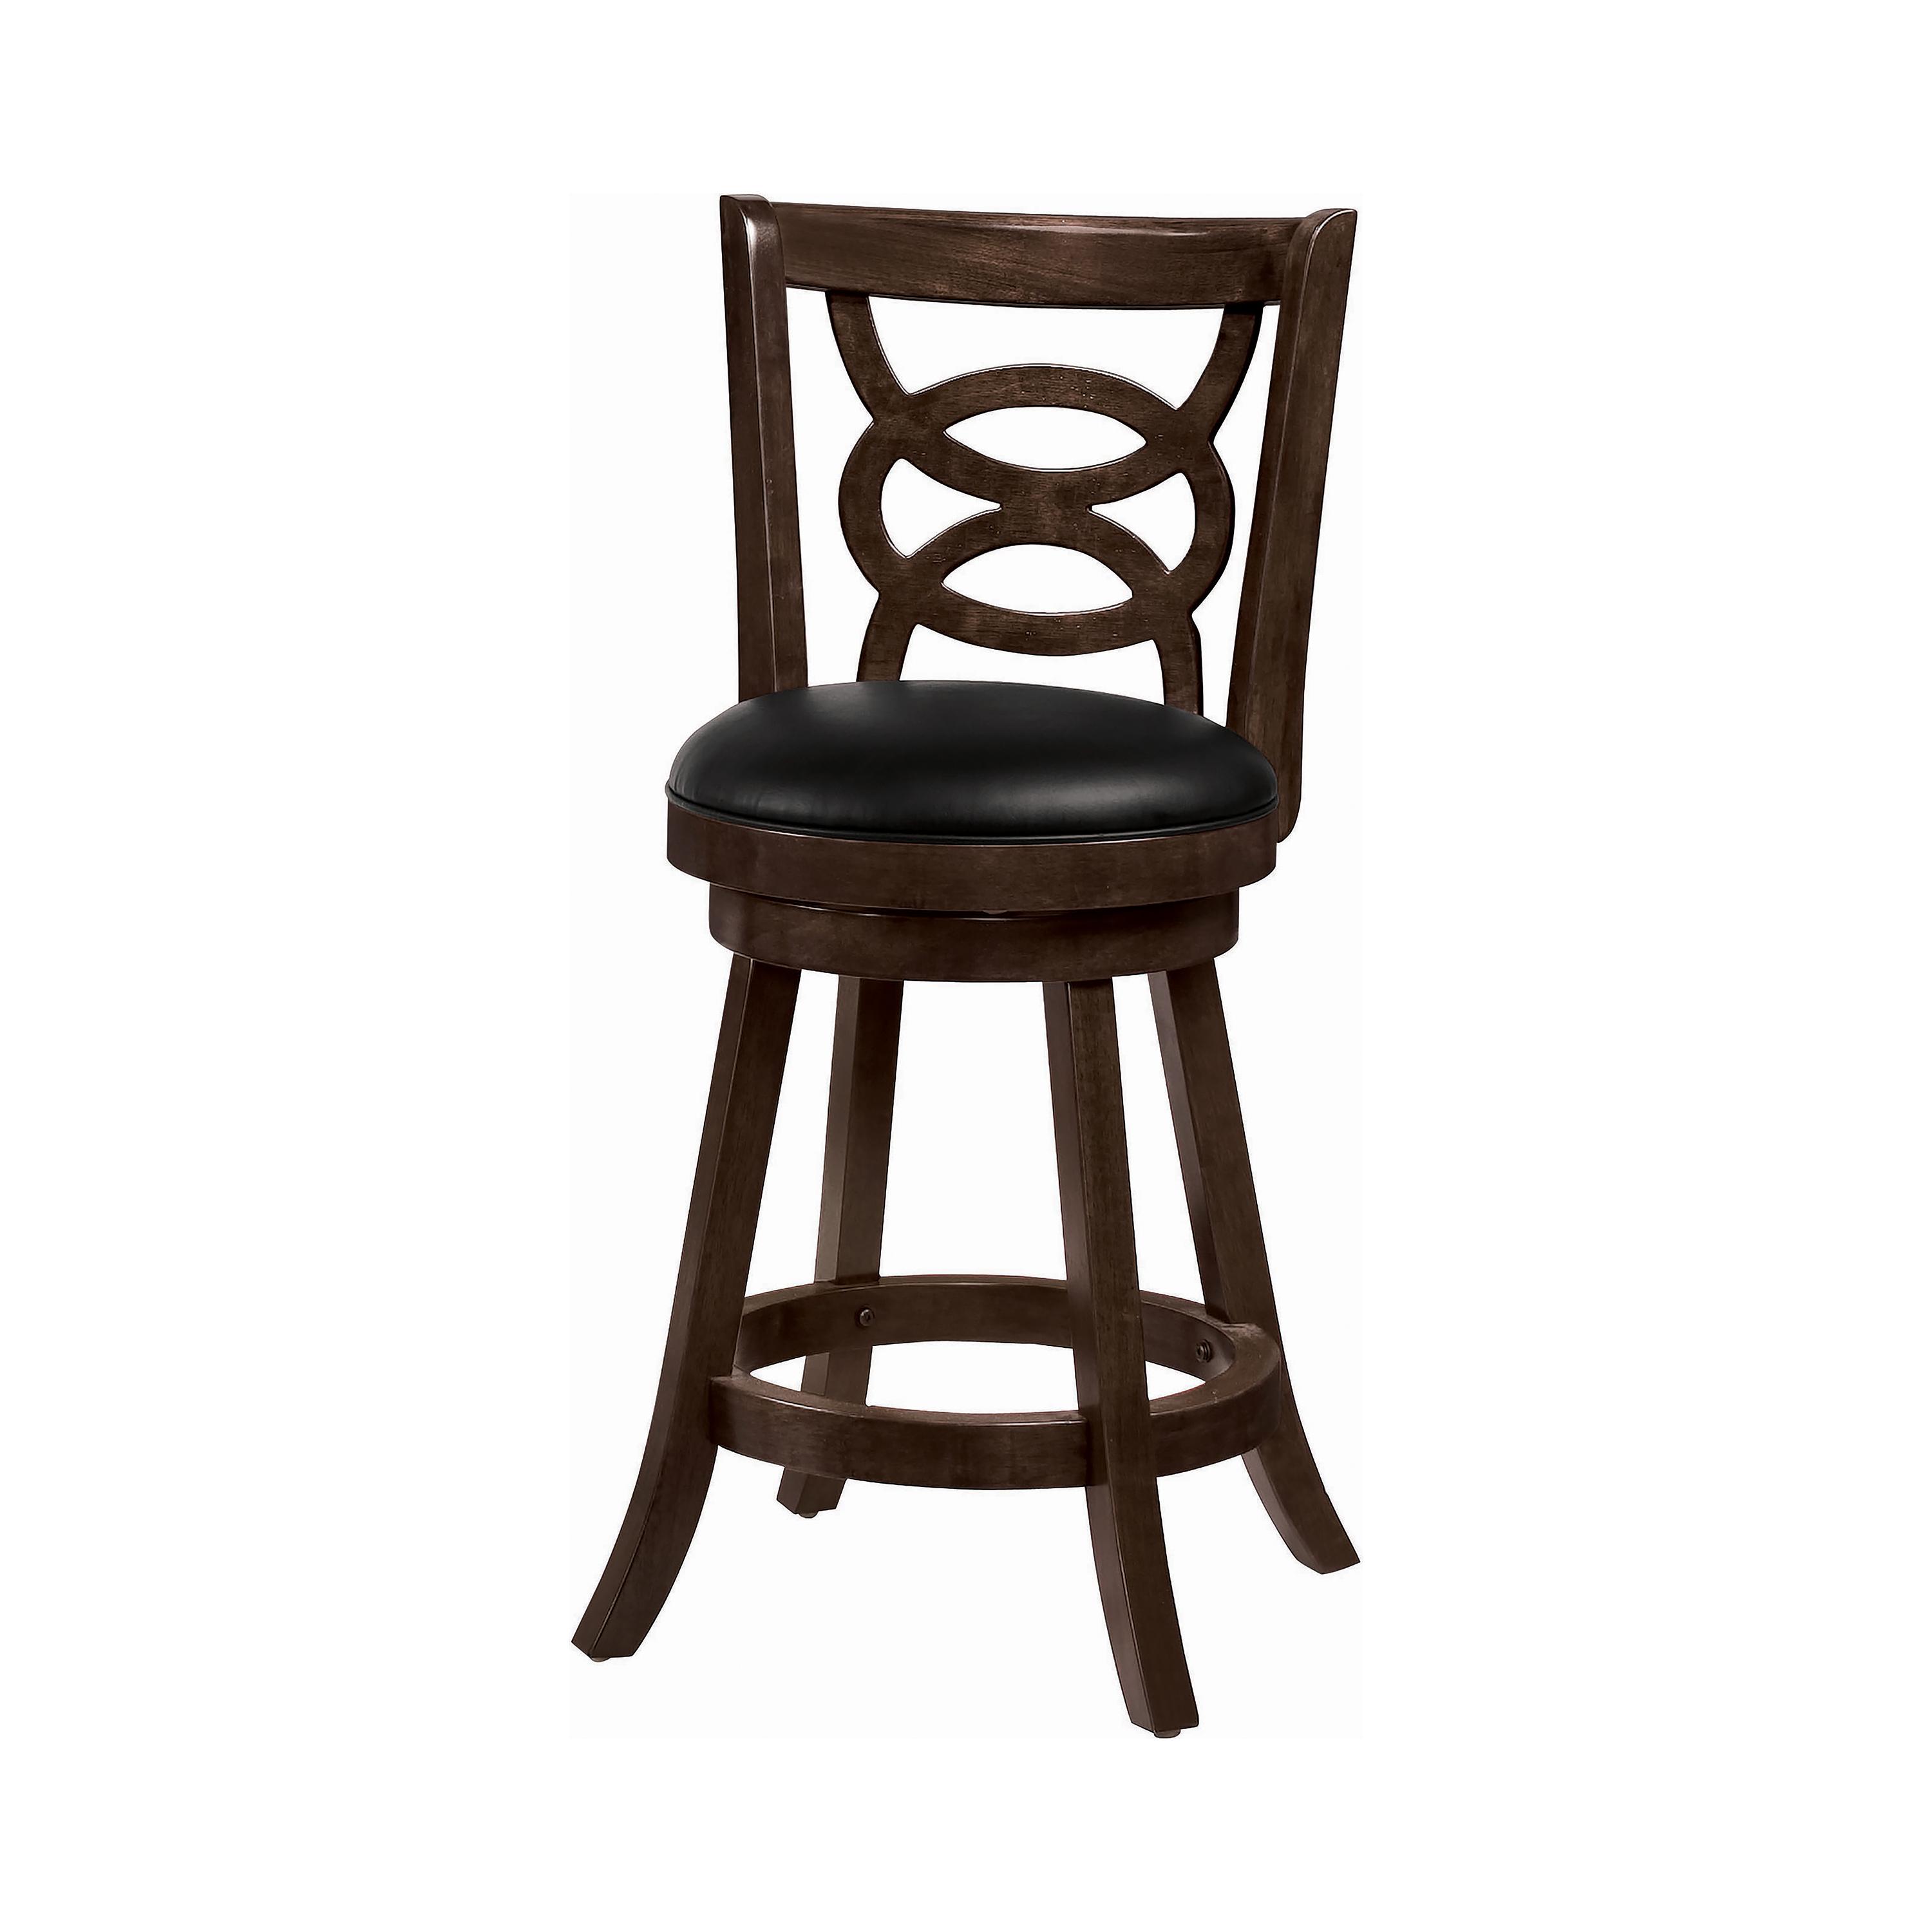 Traditional Counter Height Stool Set 101929 101929 in Cappuccino, Black Leatherette